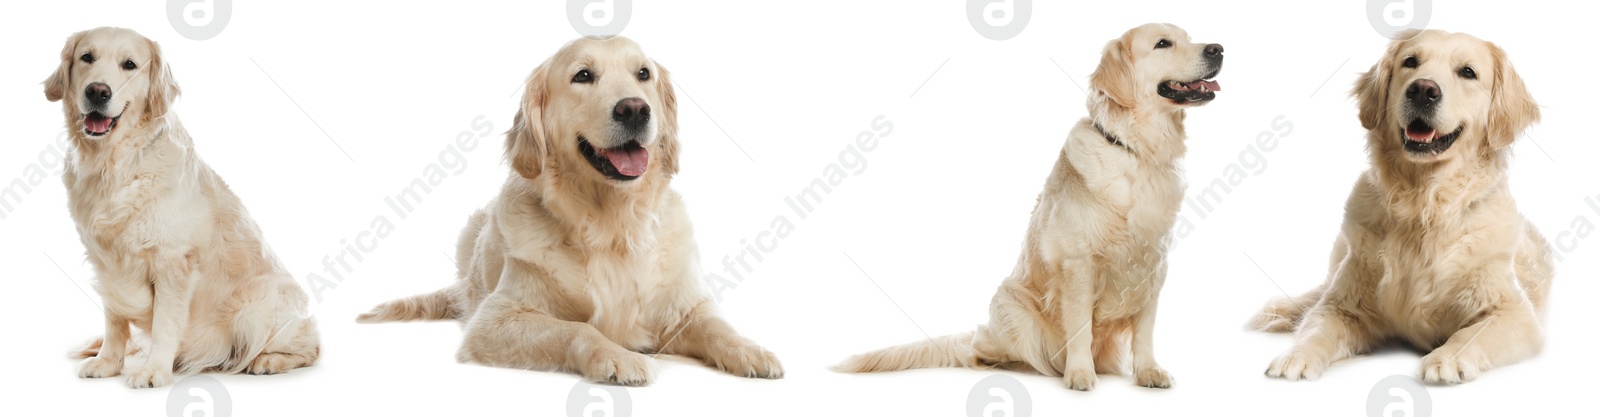 Image of Collage with photos of cute dog on white background. Banner design